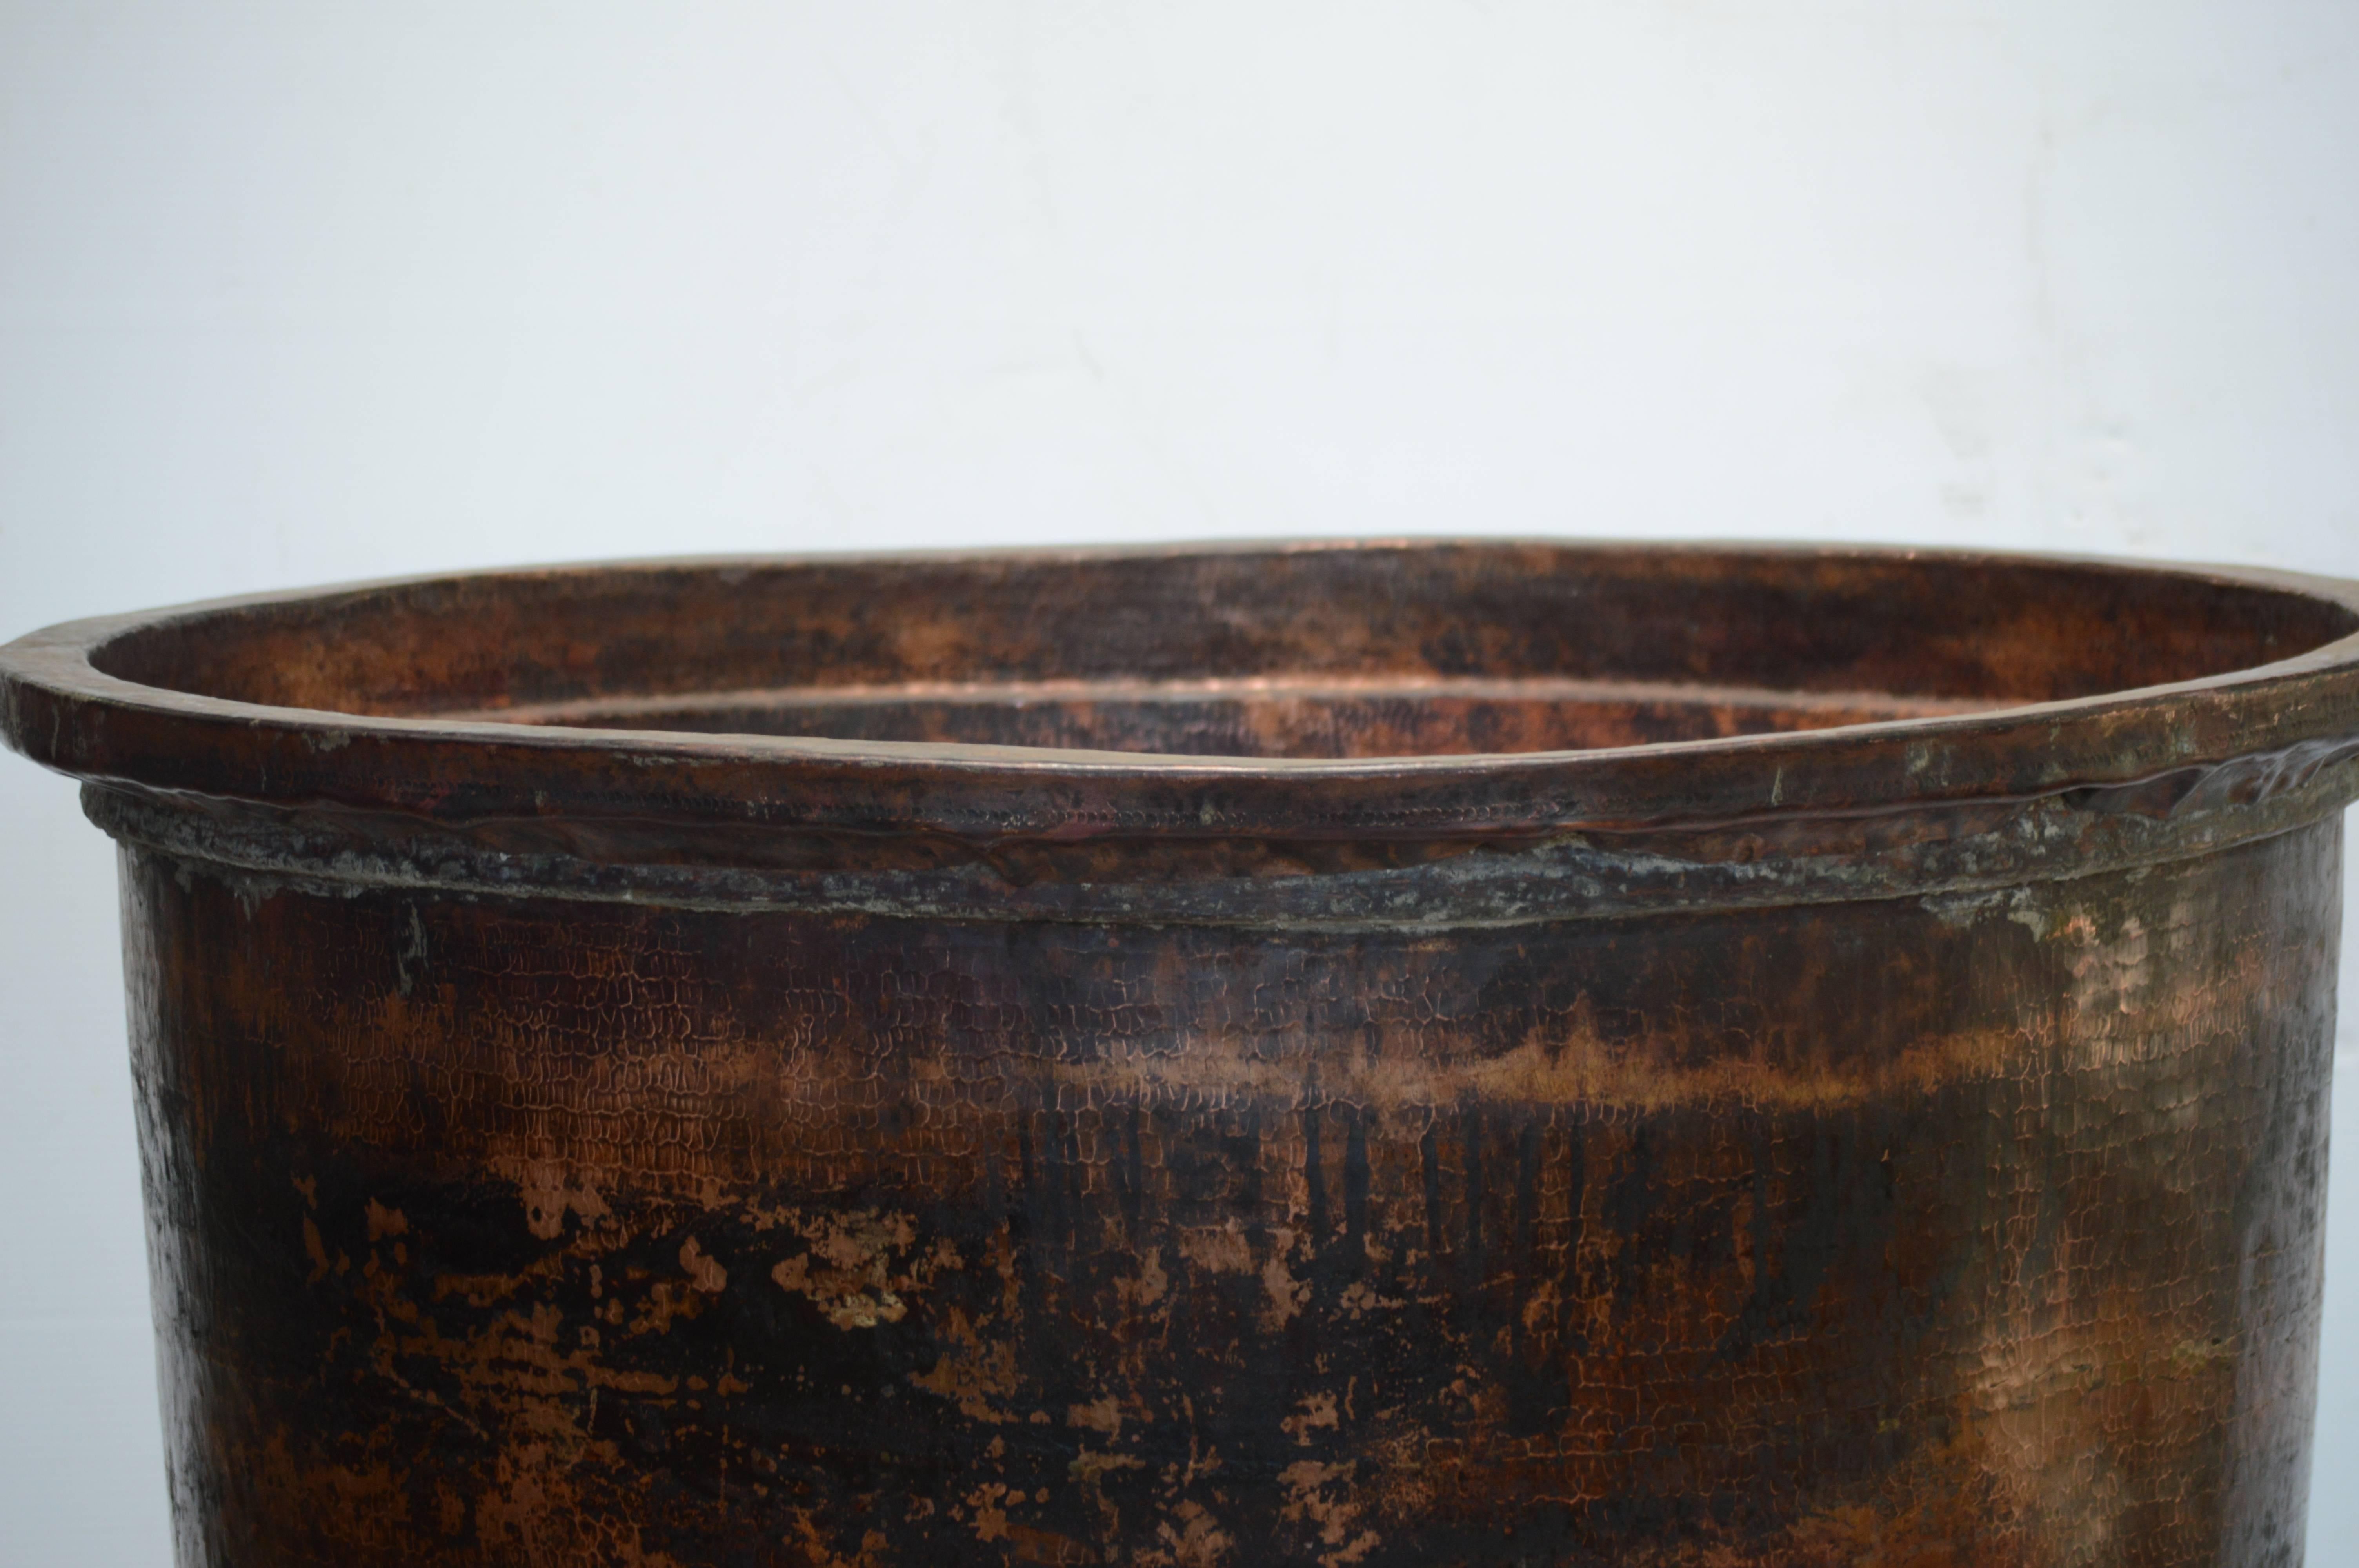 Antique vessel from Batik workshop, handmade copper with patina of age and wear.